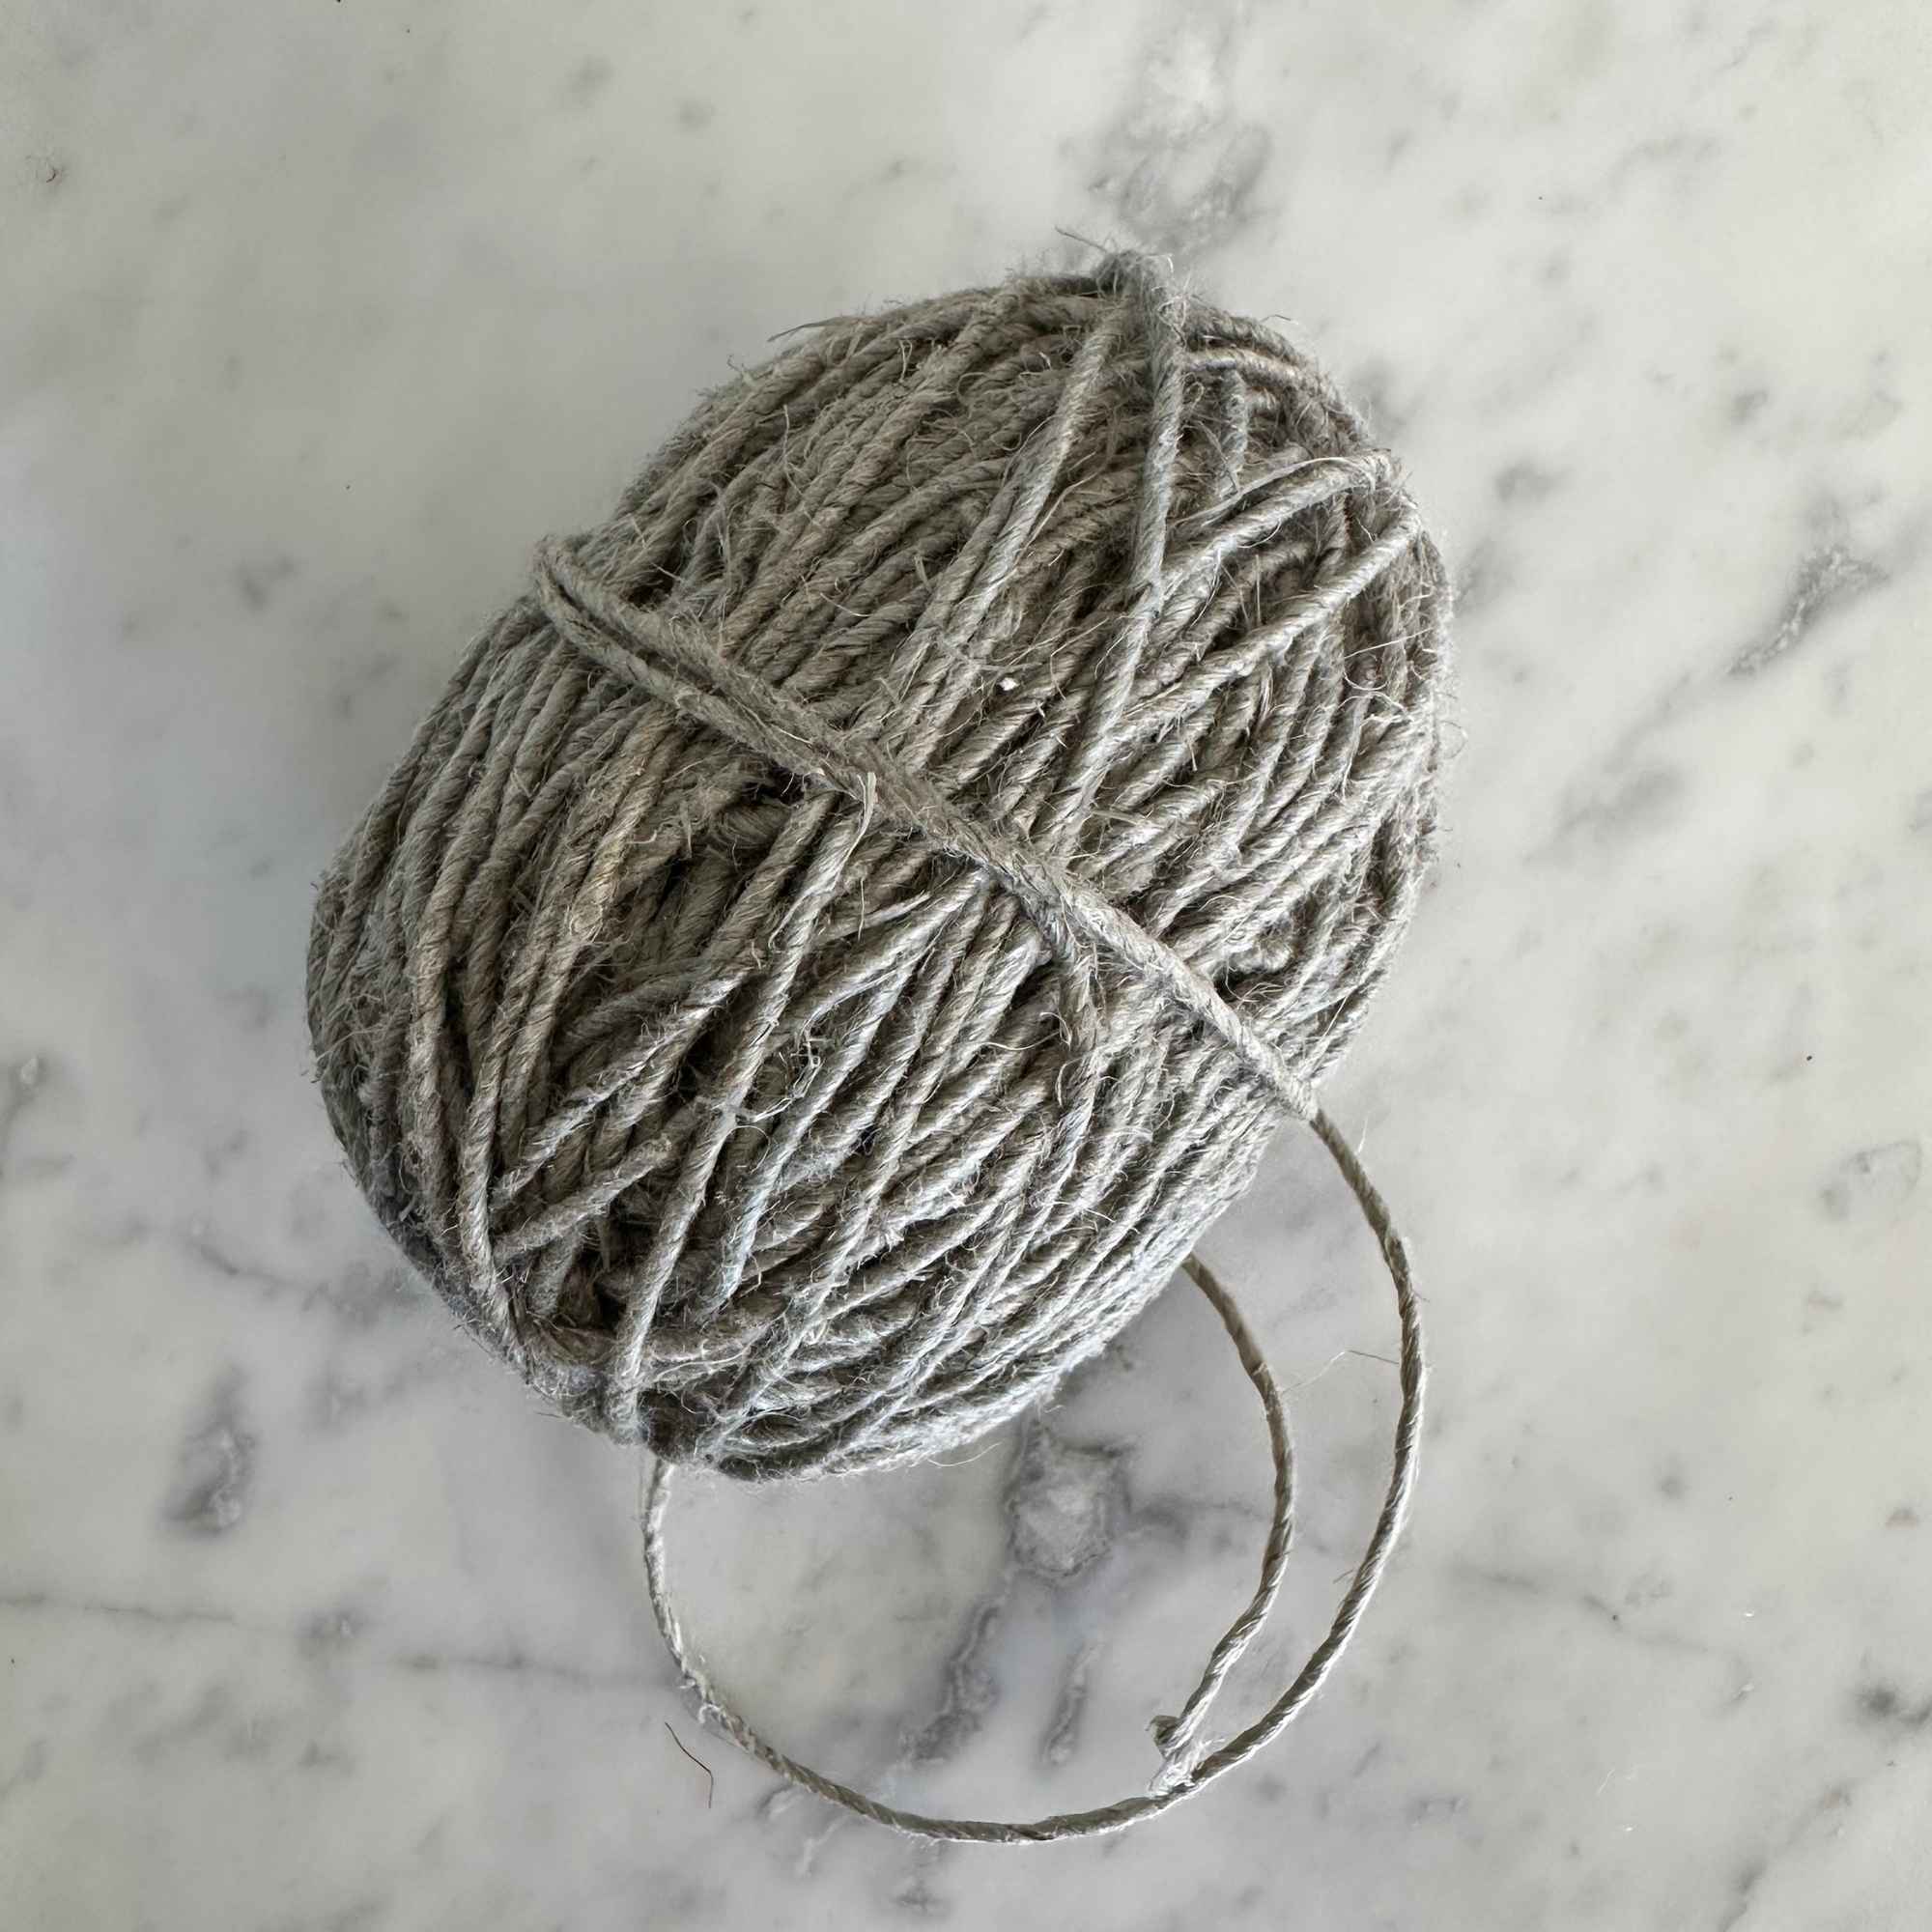 Buy Linen Twine. Thick Natural Unpolished Organic Yarn for Weaving,  Macrame, Basketry, Jewelry, Bags, Hats. Sustainable Eco Friendly Yarn. 3mm  Online in India 